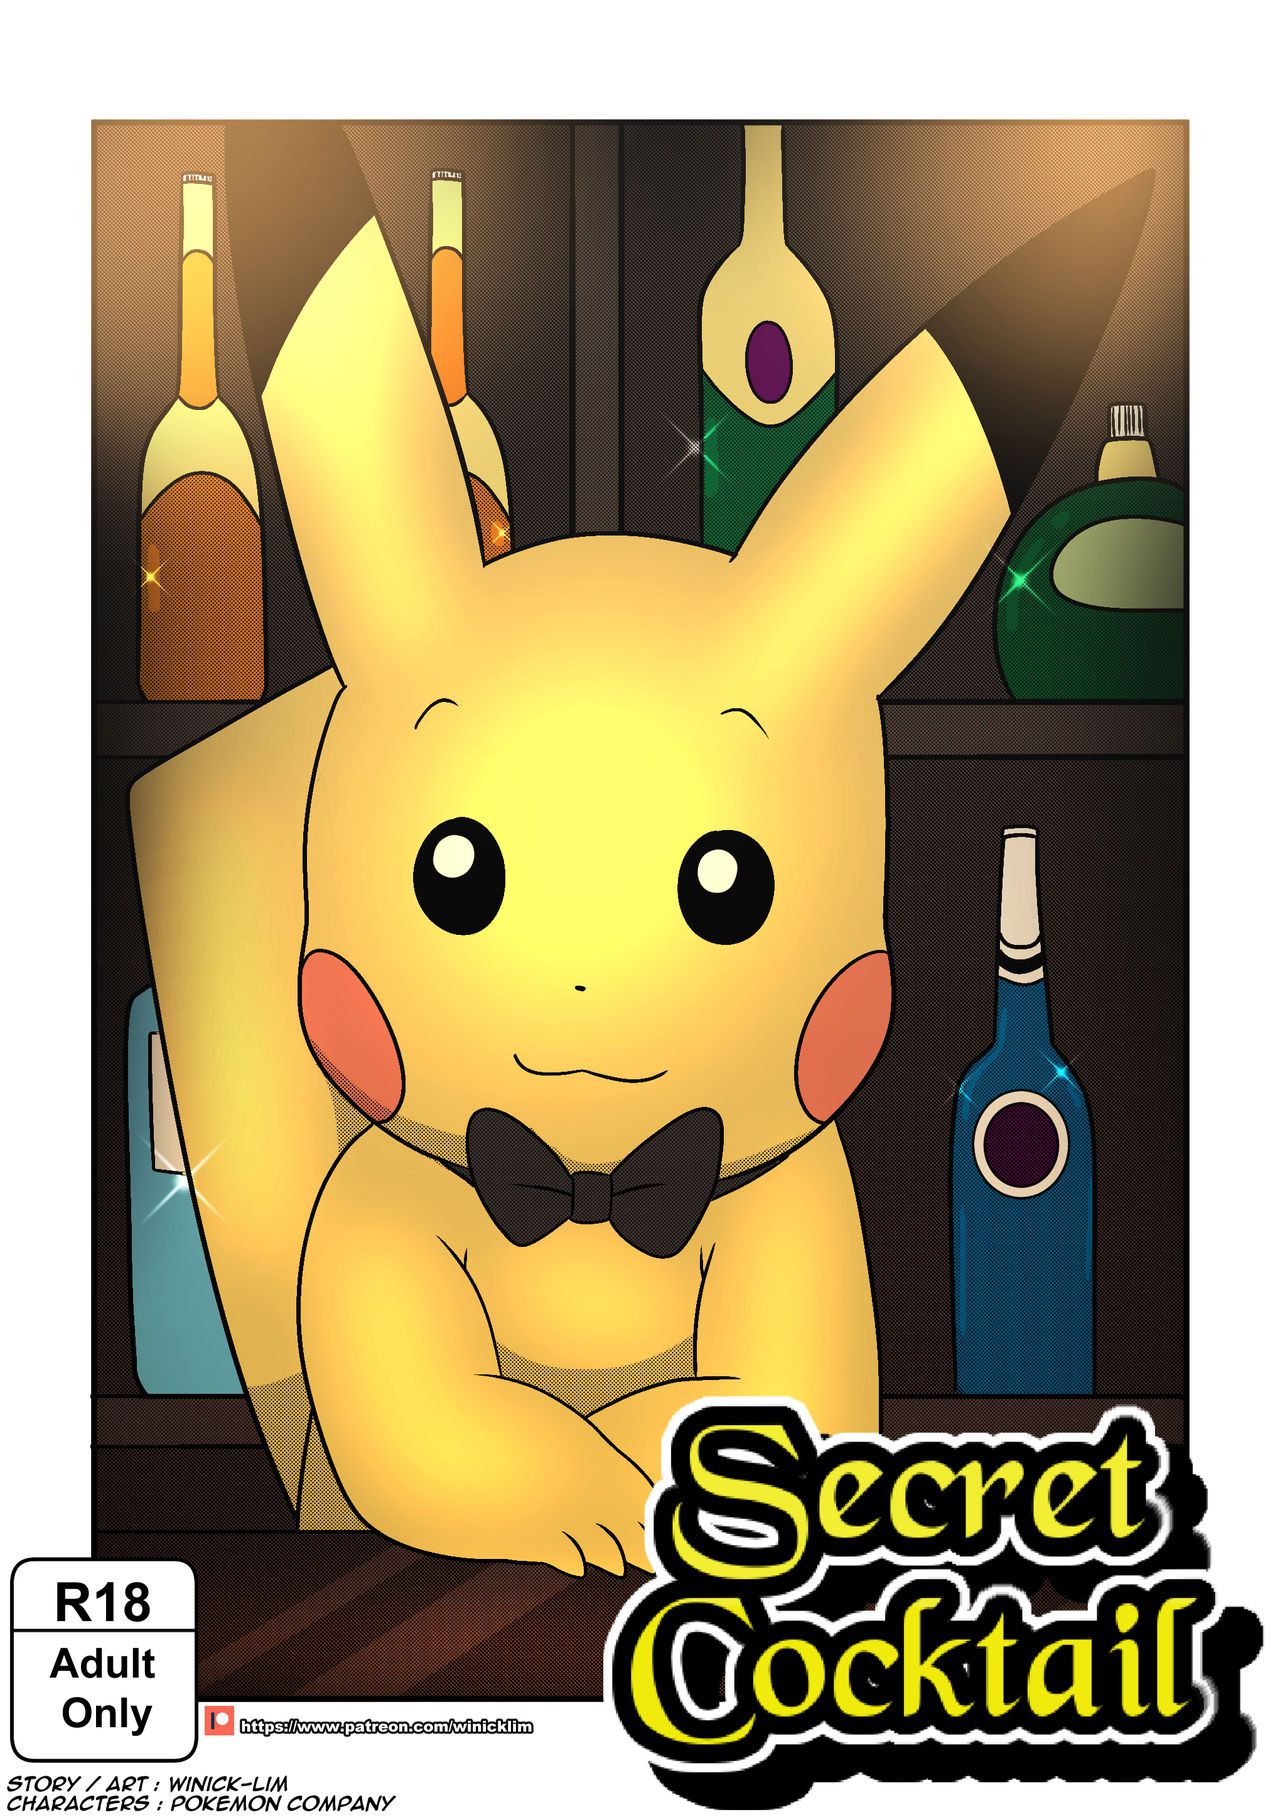 [WinickLim] Secret Cocktail [English] (Ongoing) 1